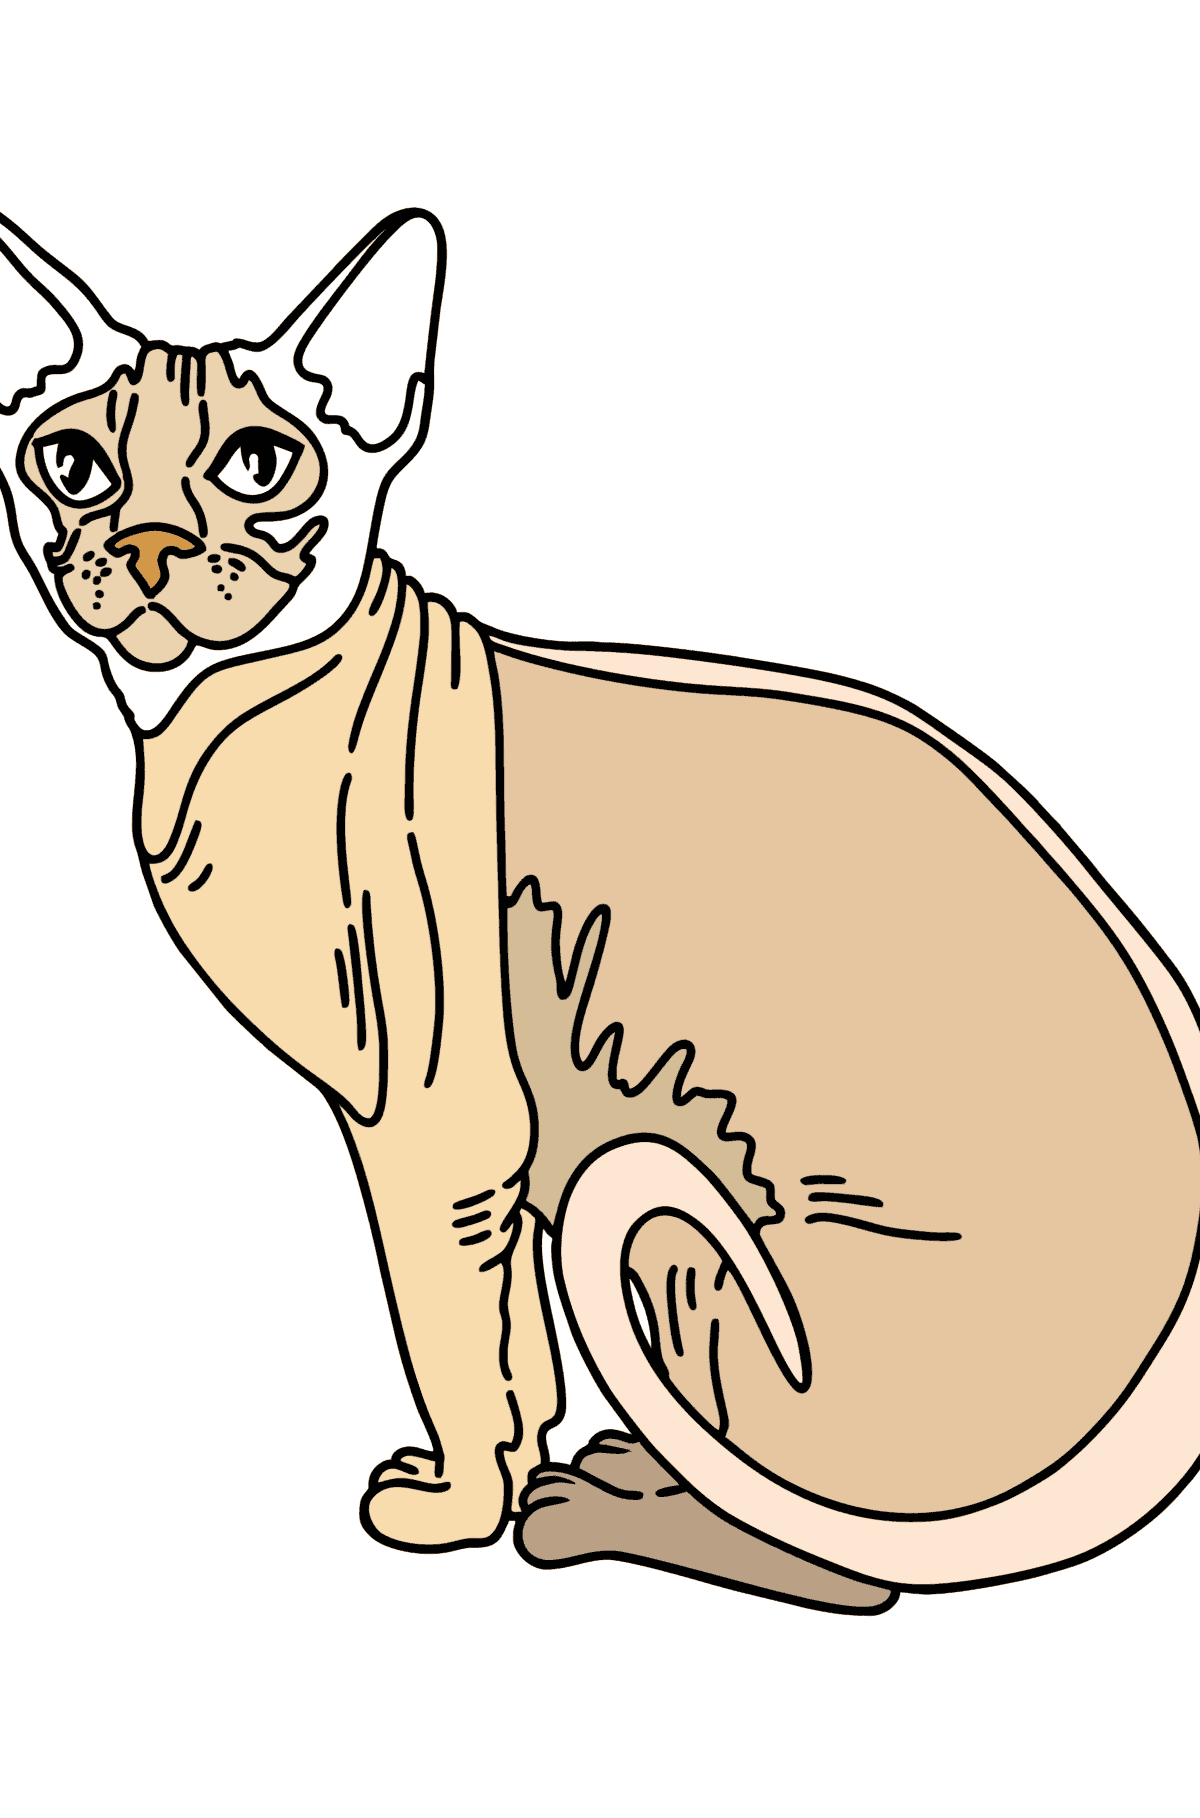 Sphynx Cat coloring page - Coloring Pages for Kids